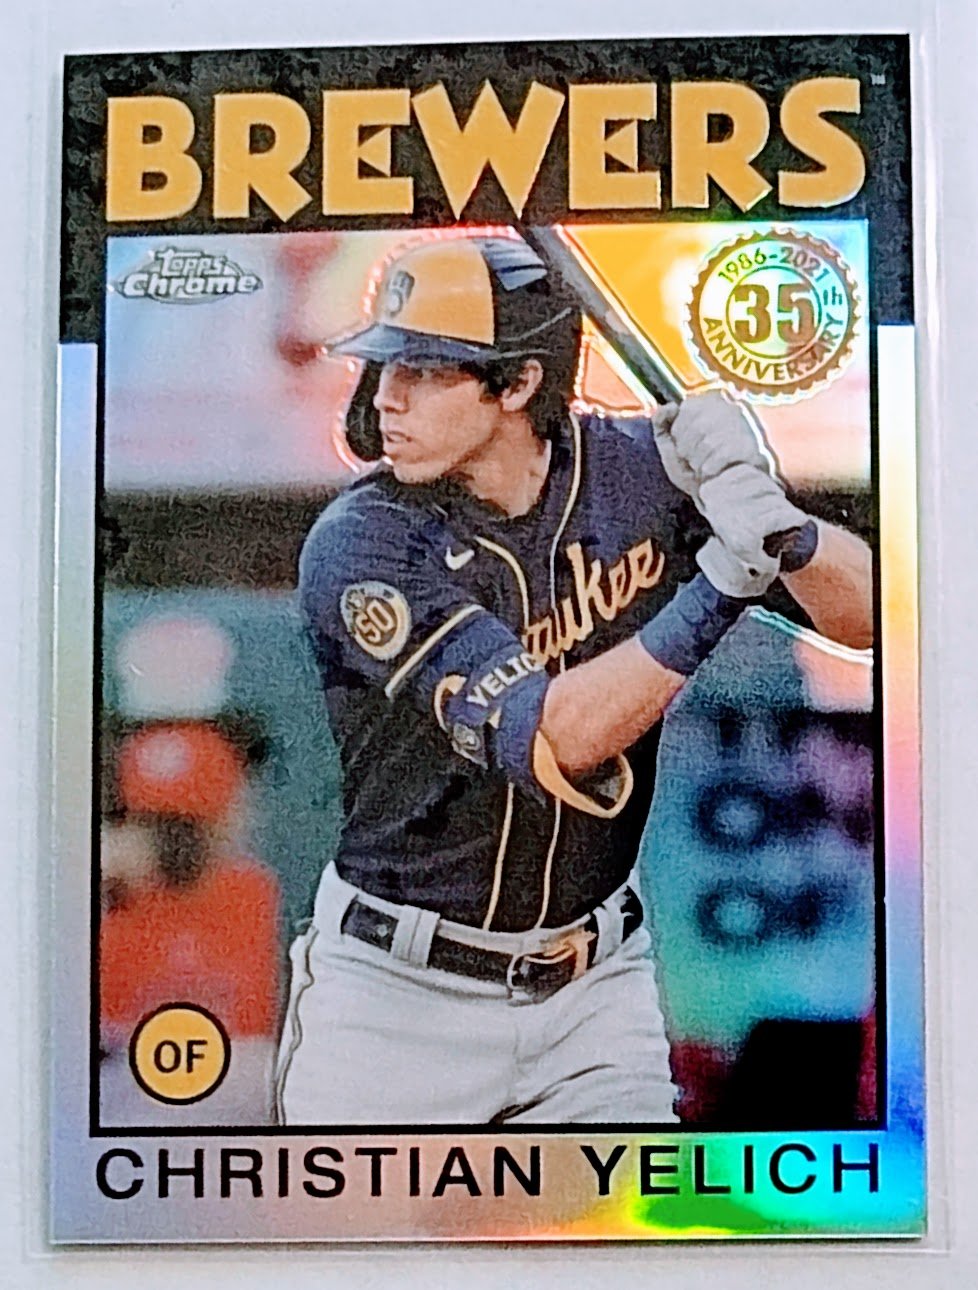 2021 Topps Chrome Update Christian Yelich 1985 35th Anniversary Refractor Baseball Card TPTV simple Xclusive Collectibles   